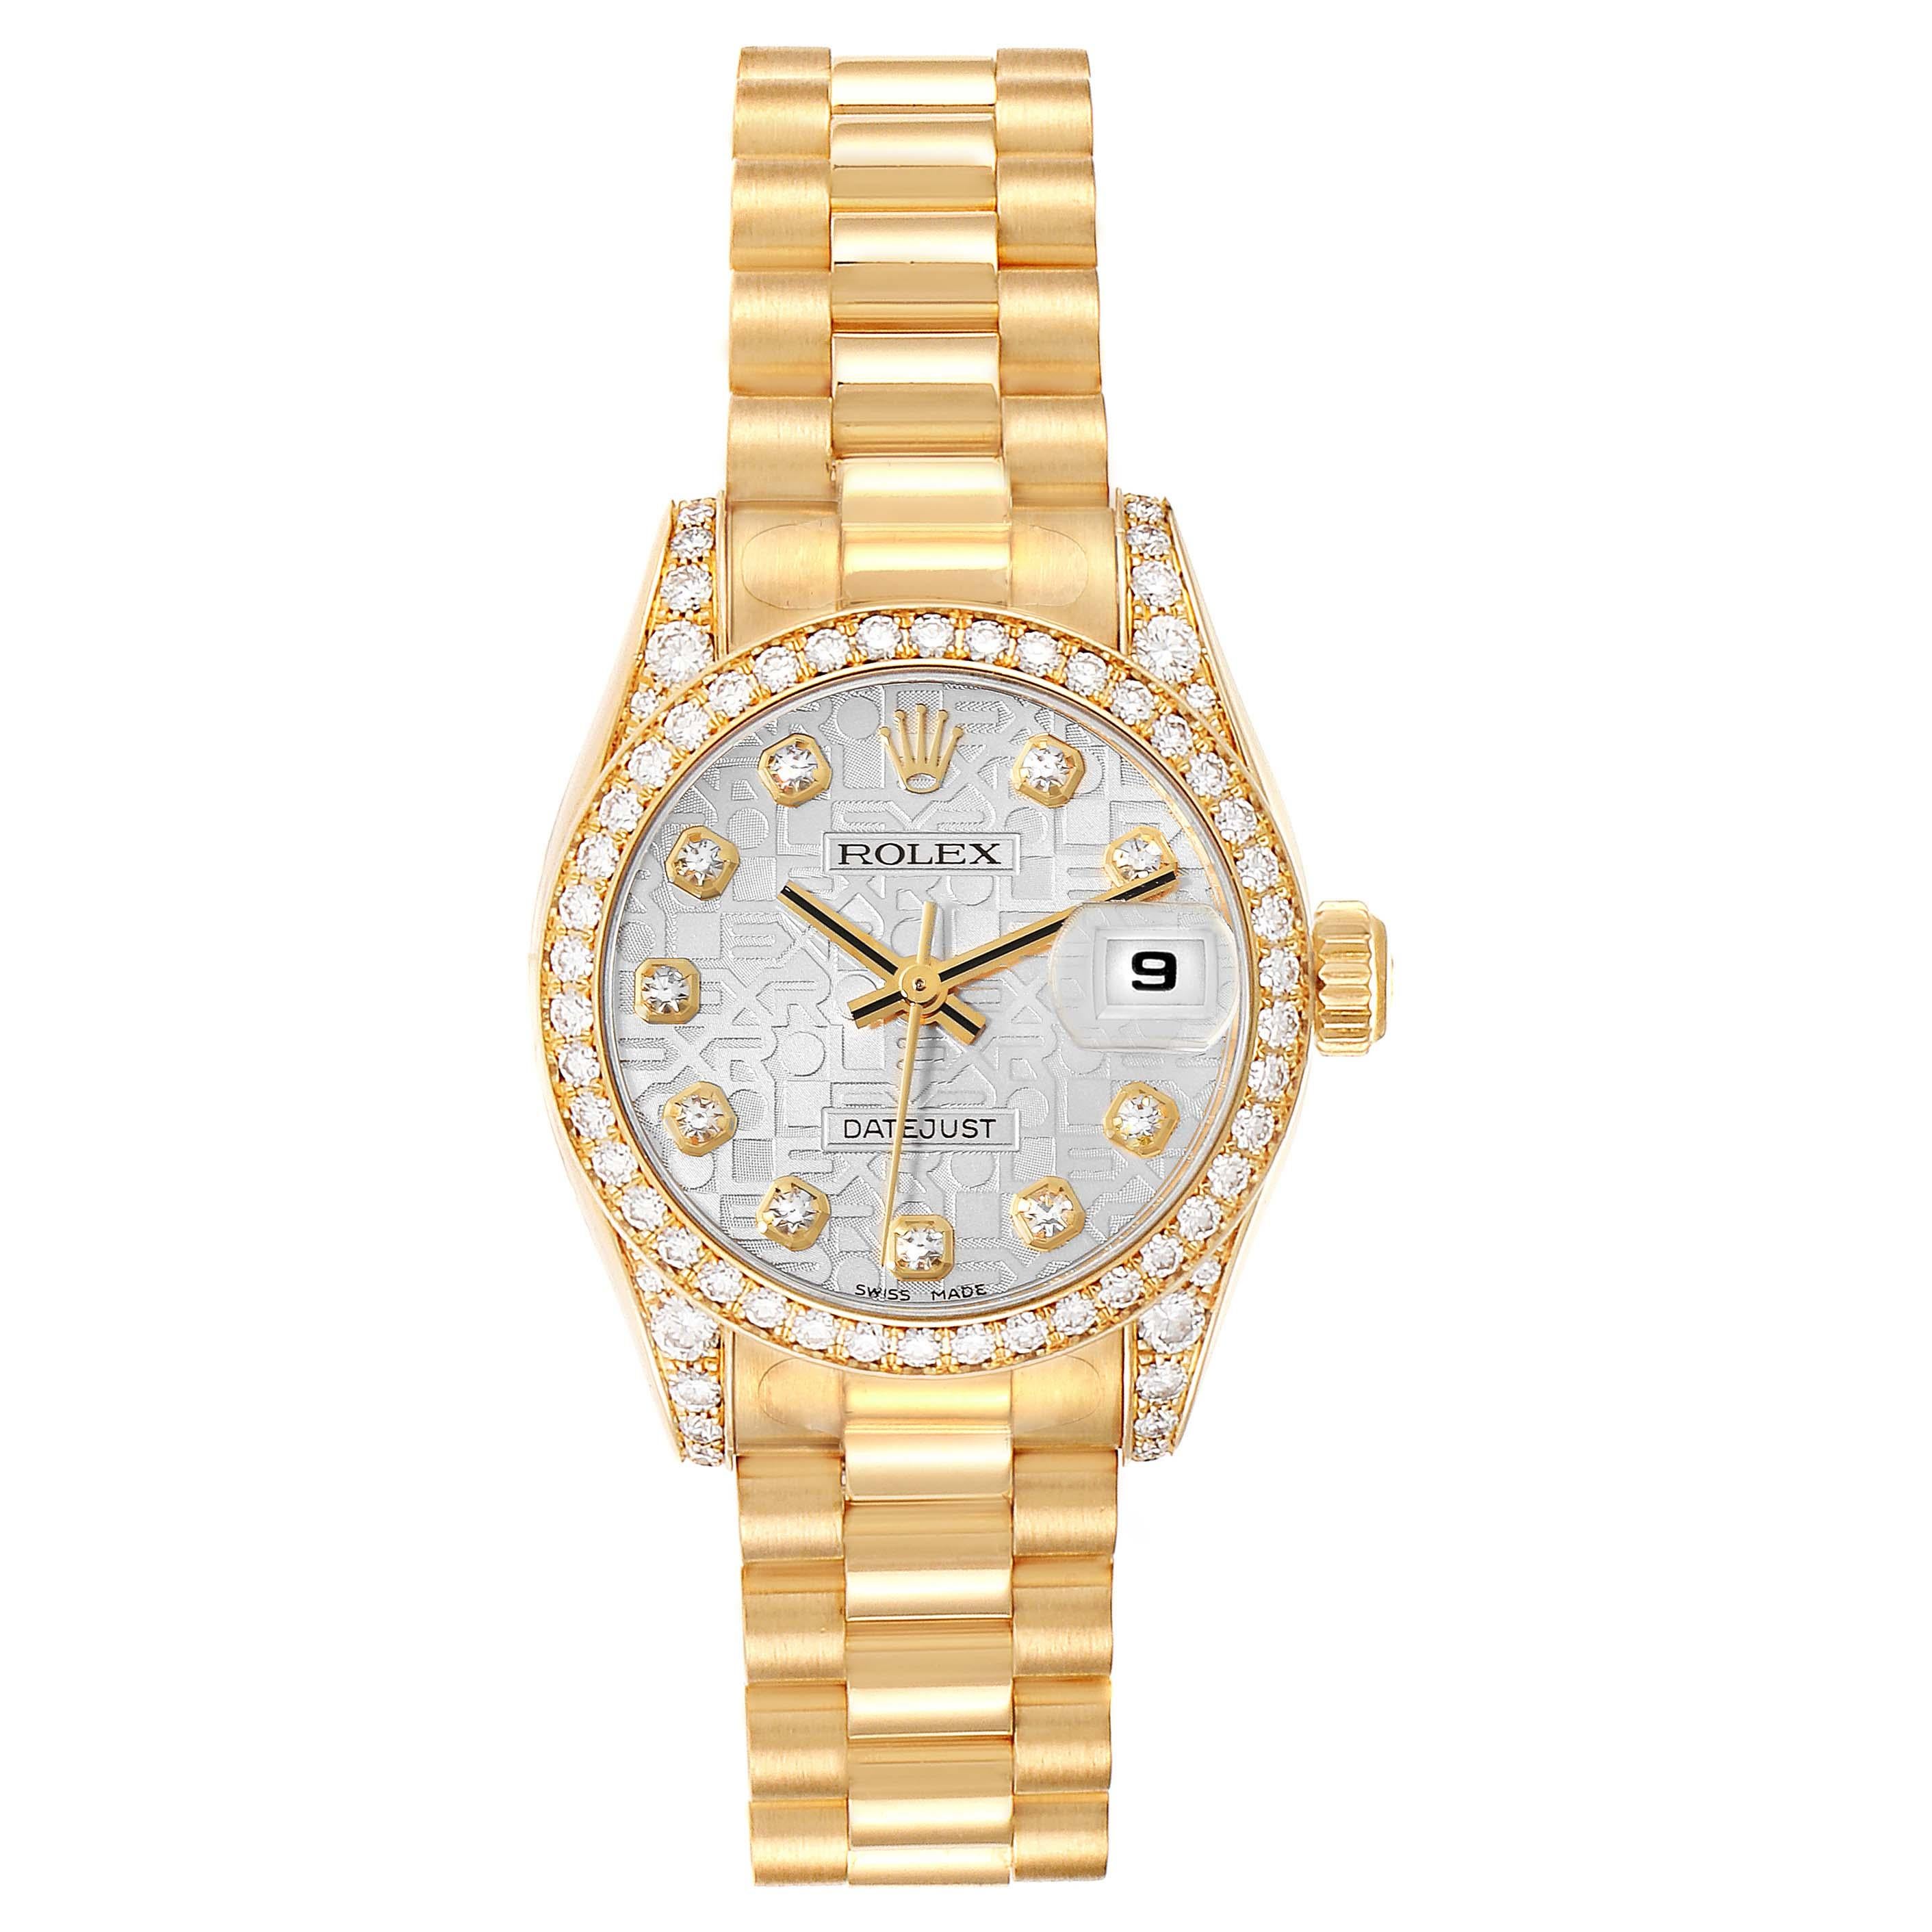 Rolex President Datejust Yellow Gold Silver Diamond Dial Ladies Watch 179158. Officially certified chronometer automatic self-winding movement. 18k yellow gold oyster case 26.0 mm in diameter. Rolex logo on the crown. Original Rolex factory diamond